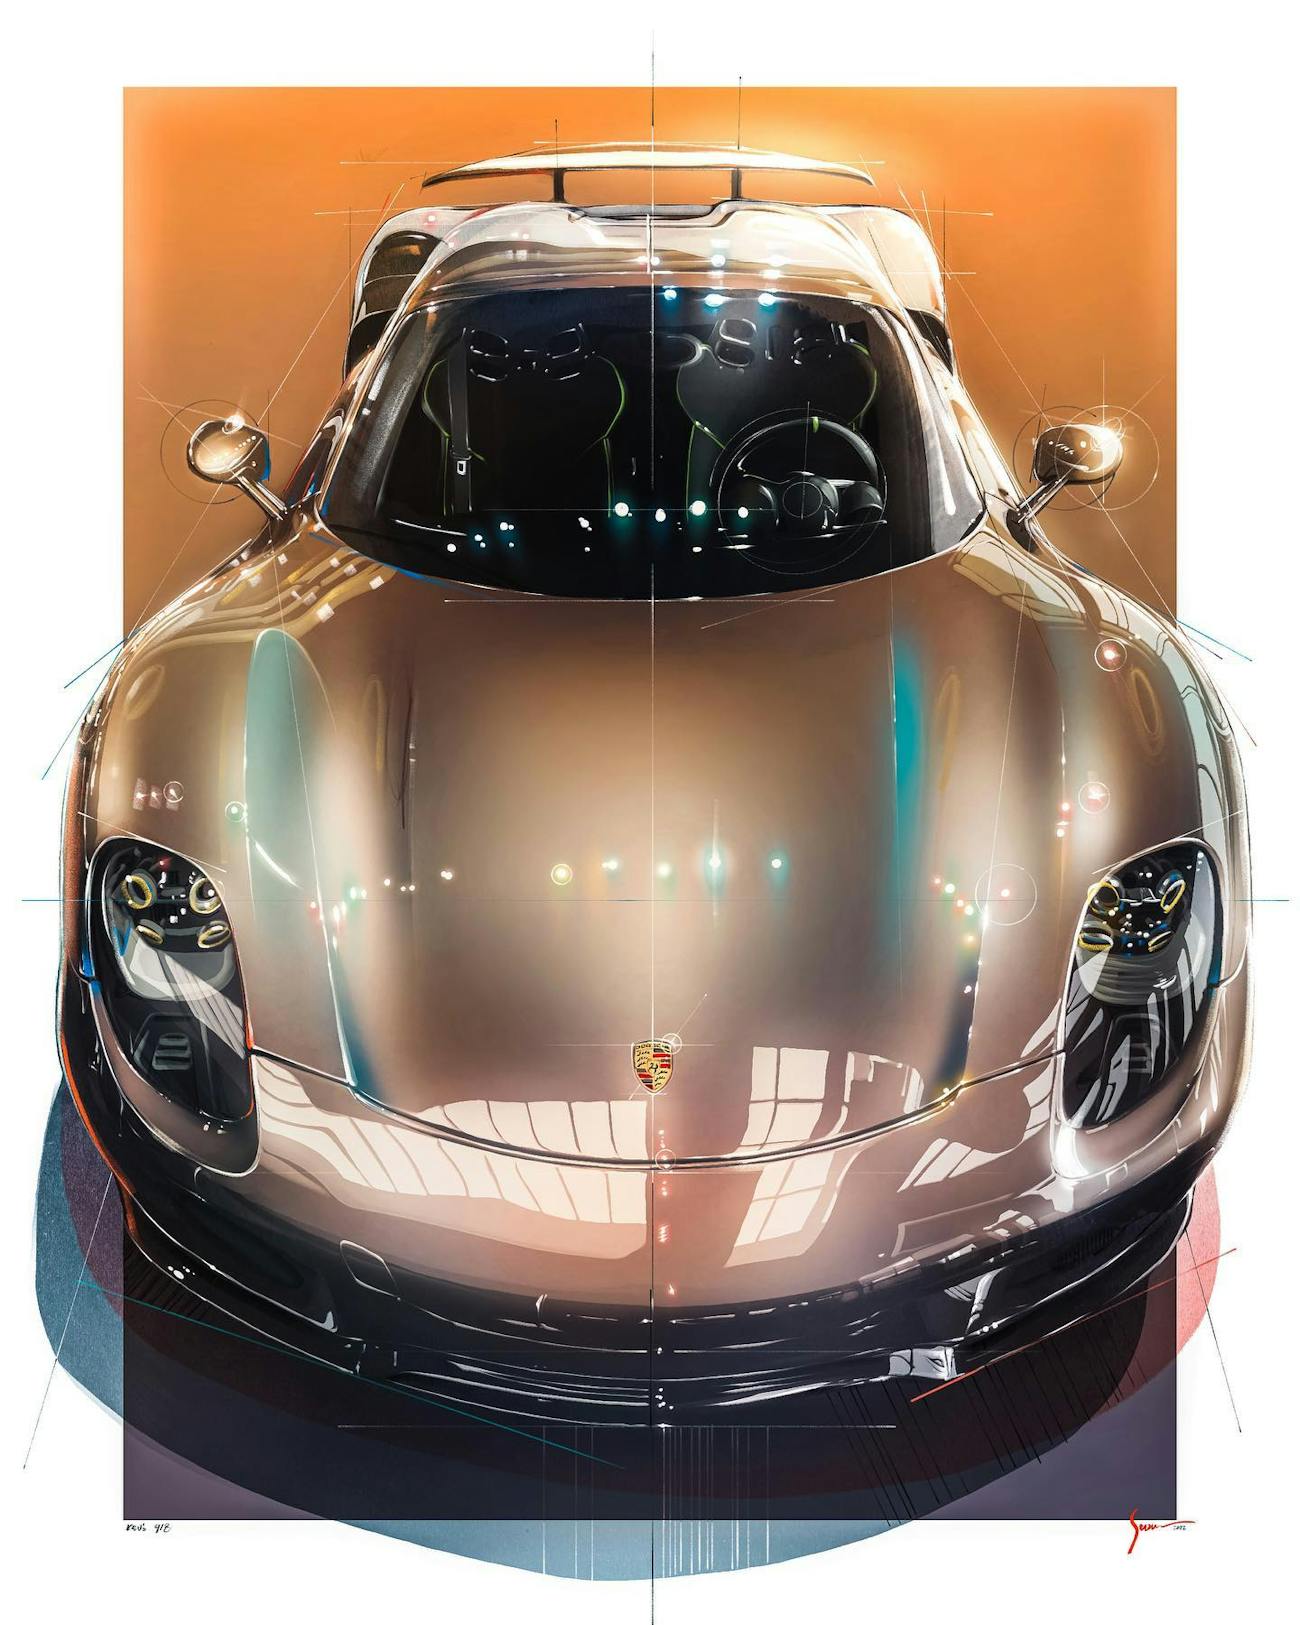 Painting of Porsche 918 Spyder, head-on view of car